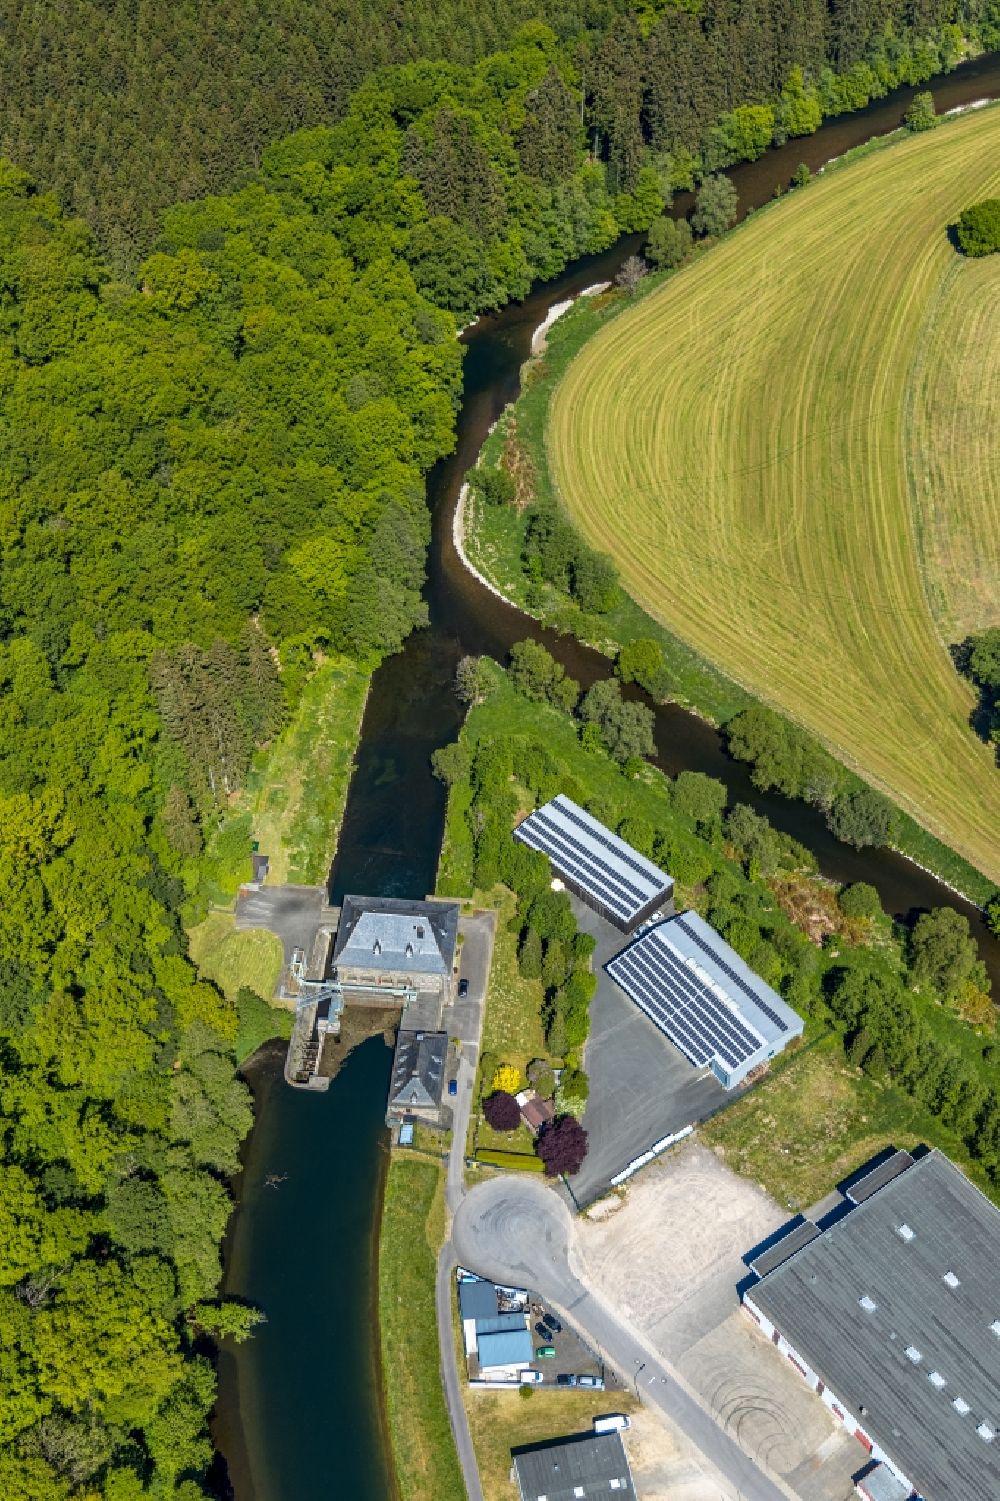 Finnentrop from above - Structure and dams of the waterworks and hydroelectric power plant on Industriestrasse in the district Lenhausen in Finnentrop in the state North Rhine-Westphalia, Germany